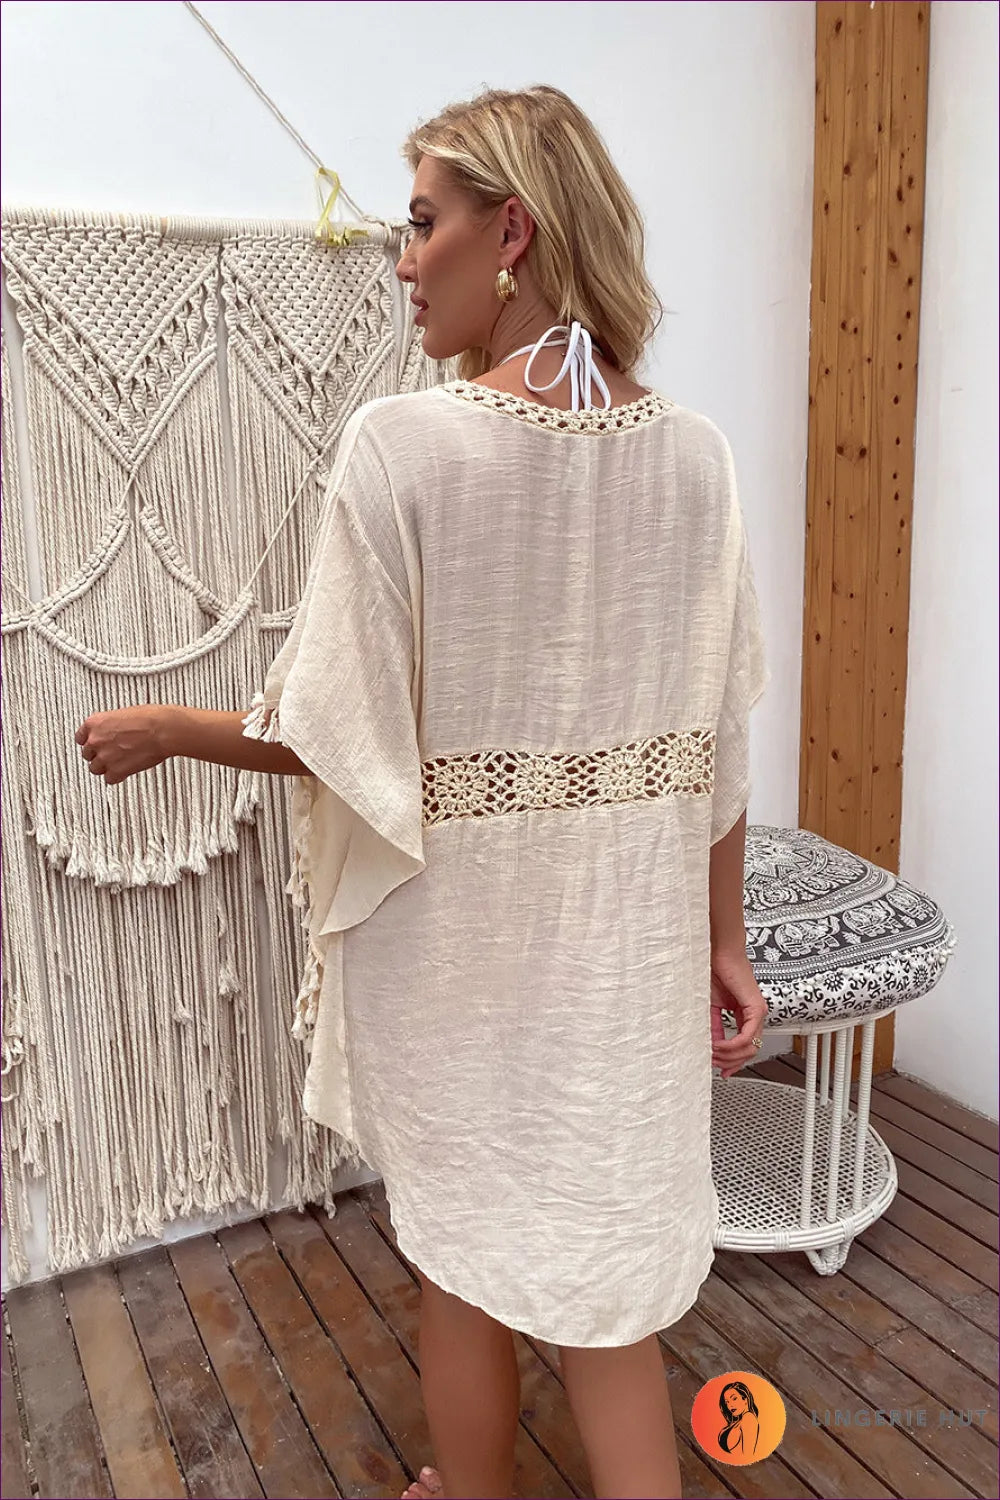 Experience Outdoor Elegance With Our Hand-crocheted Tassel Midi Dress. Artisanal Craftsmanship And Bohemian